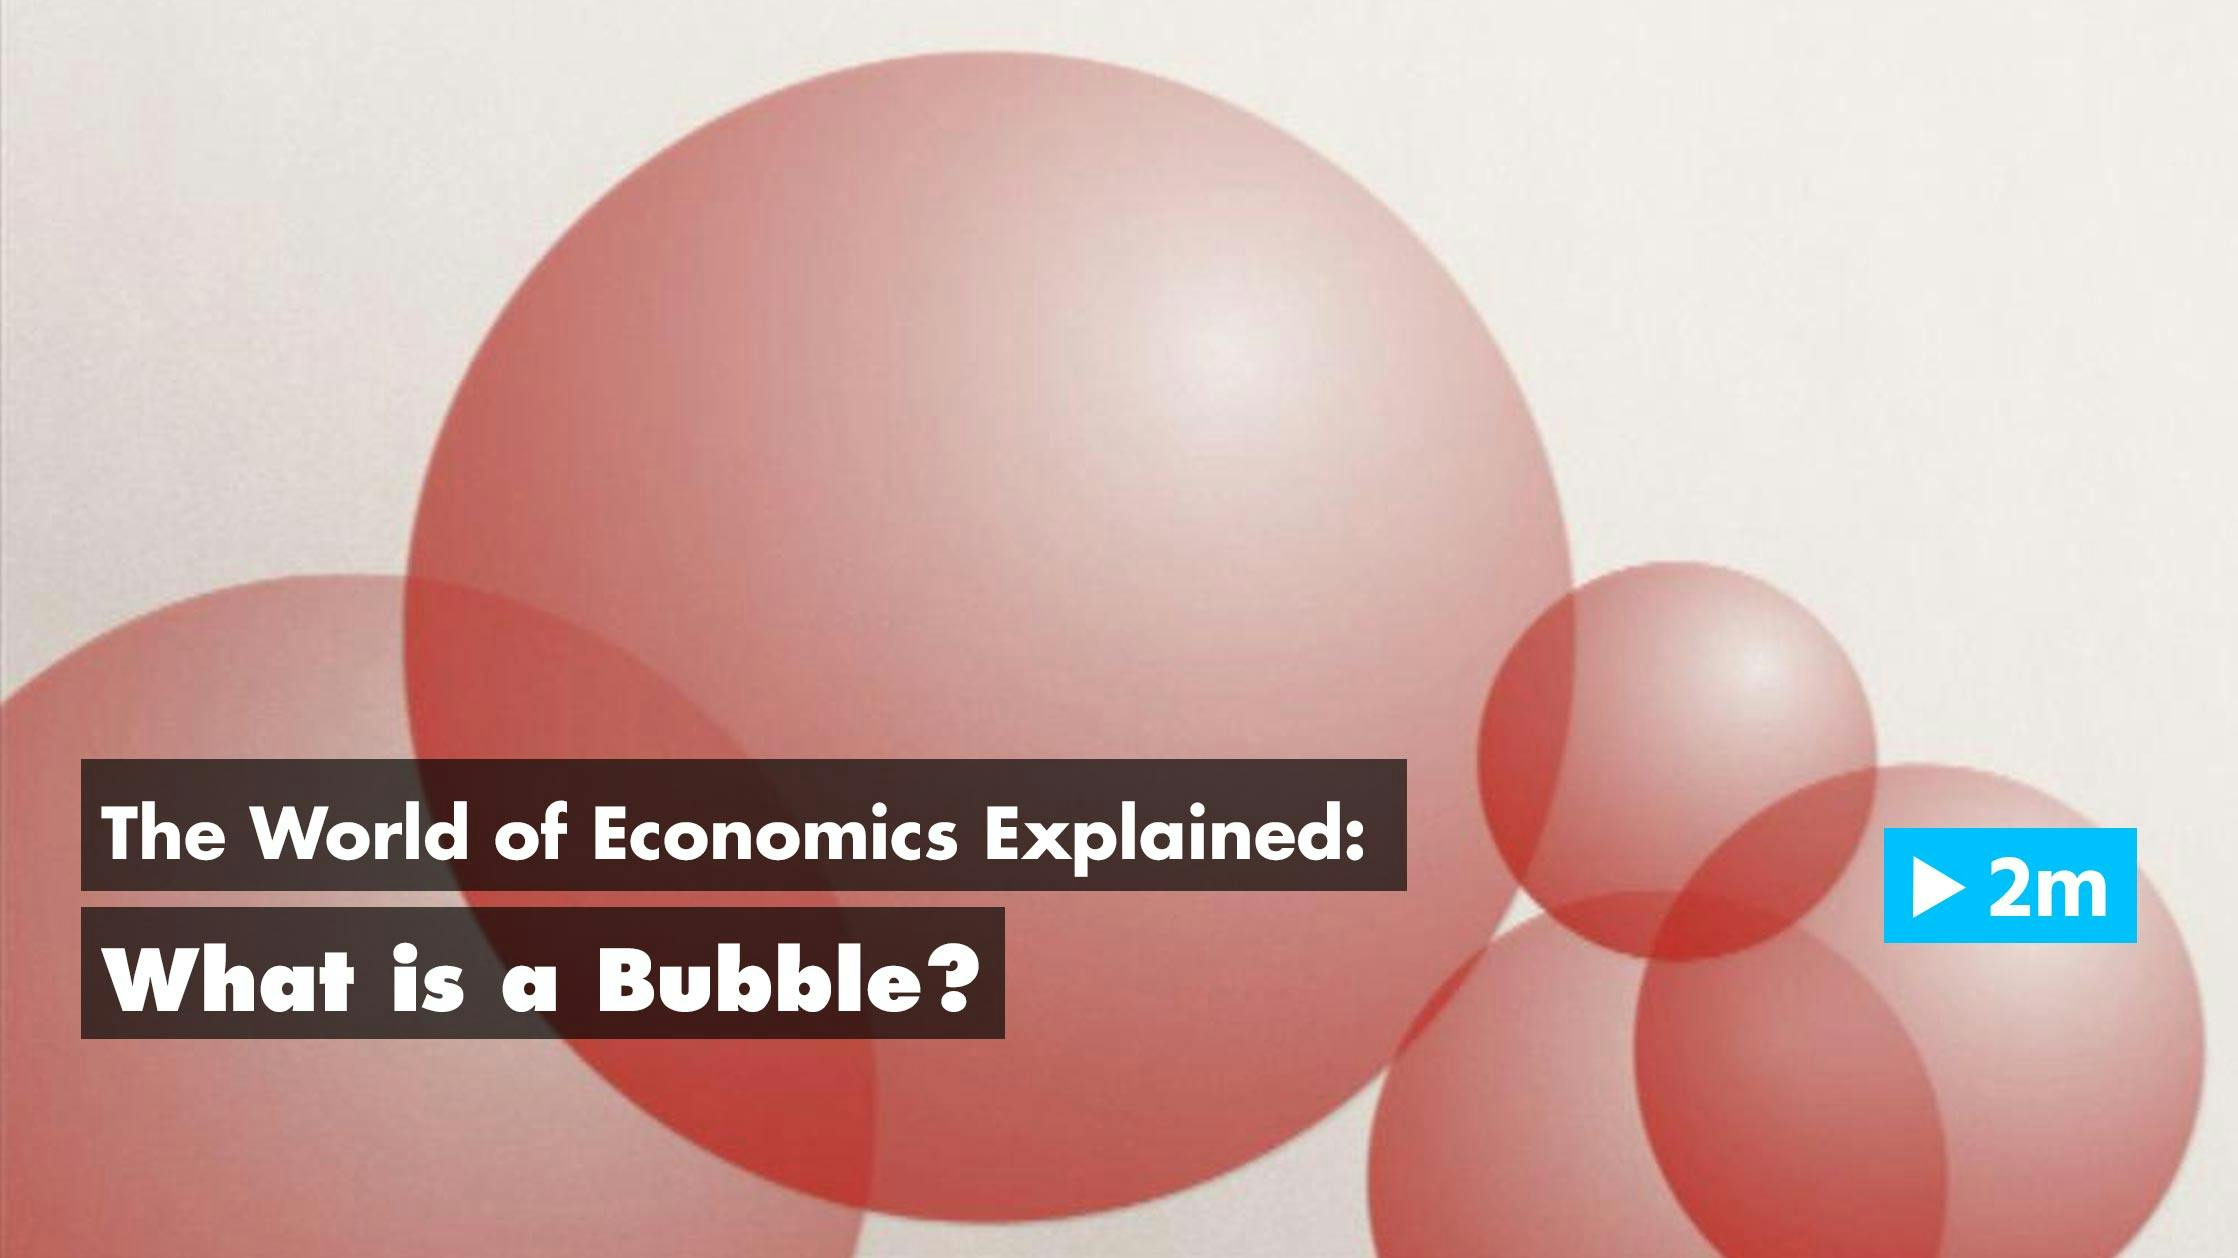 The World of Economics Explained: What is a bubble?